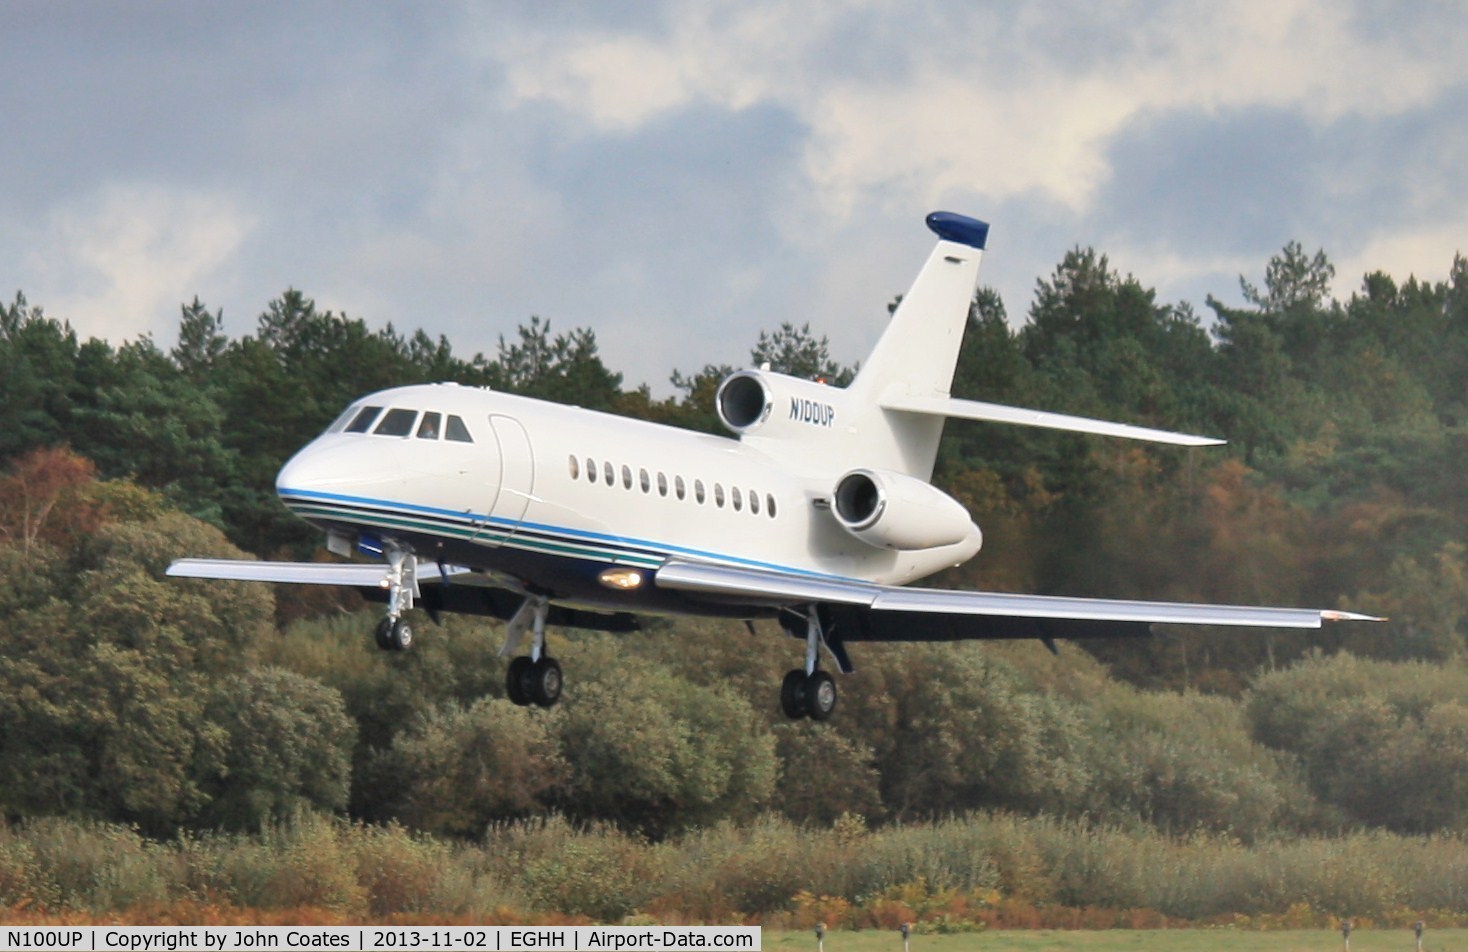 N100UP, 1988 Dassault Falcon 900 C/N 44, Regular visitor about to touch down 26